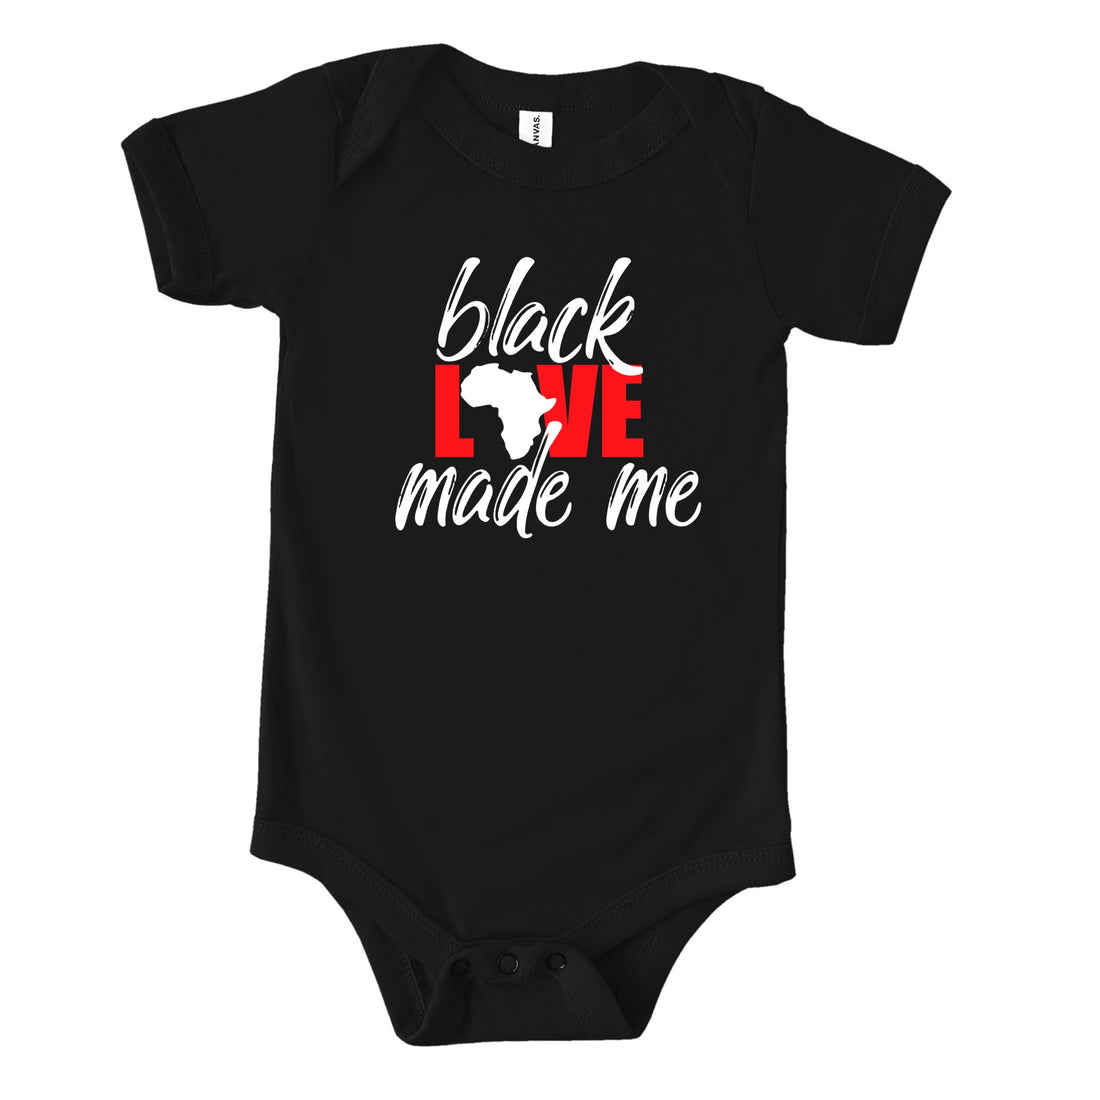 Profyle District - Black Love Made Me (Infant) - Youth T-Shirts - Black